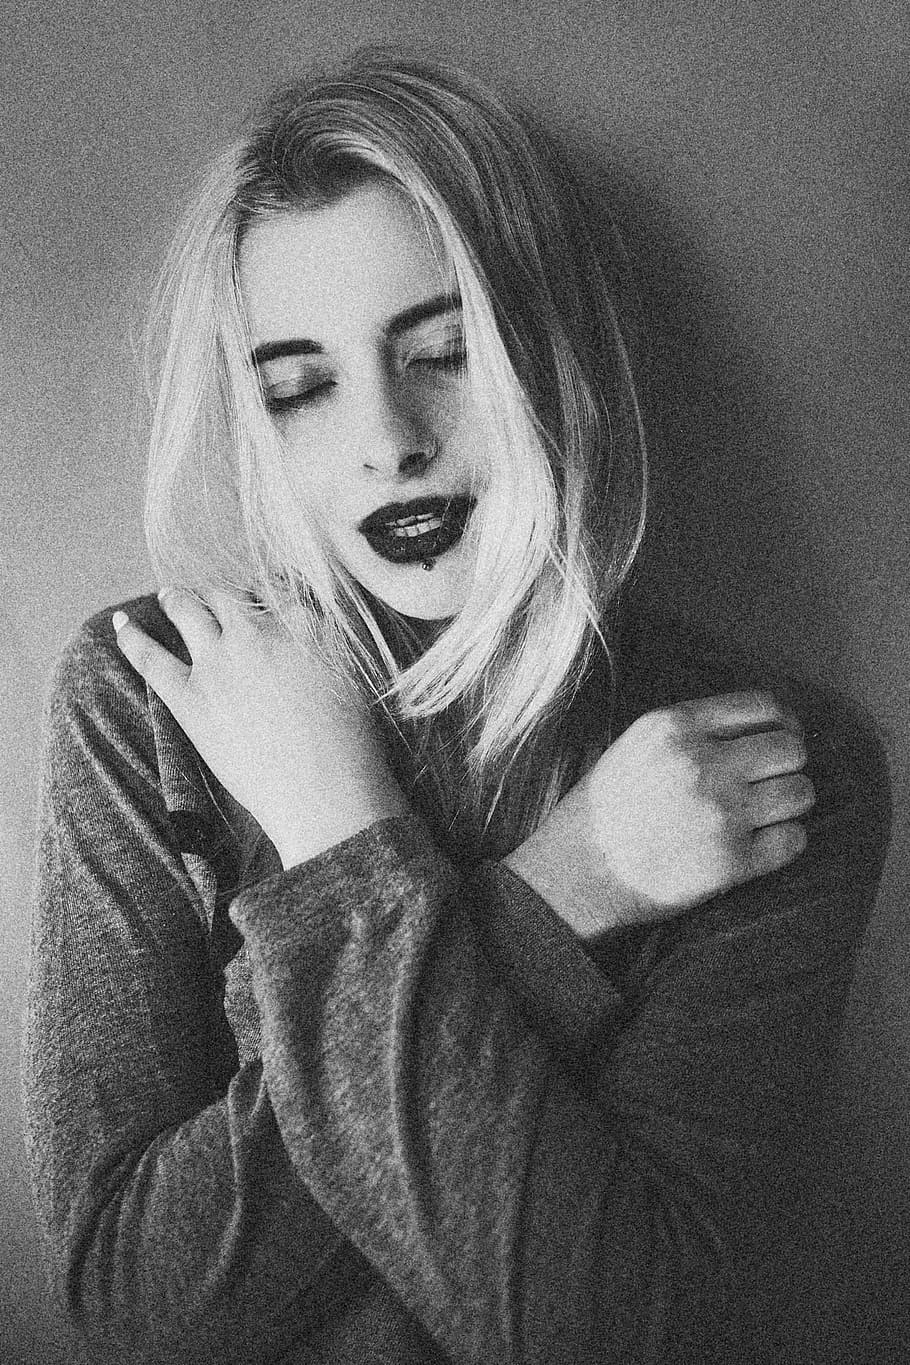 grayscale photography, woman, sweater, grayscale, photography, bw, retro, girl, portrait, posture